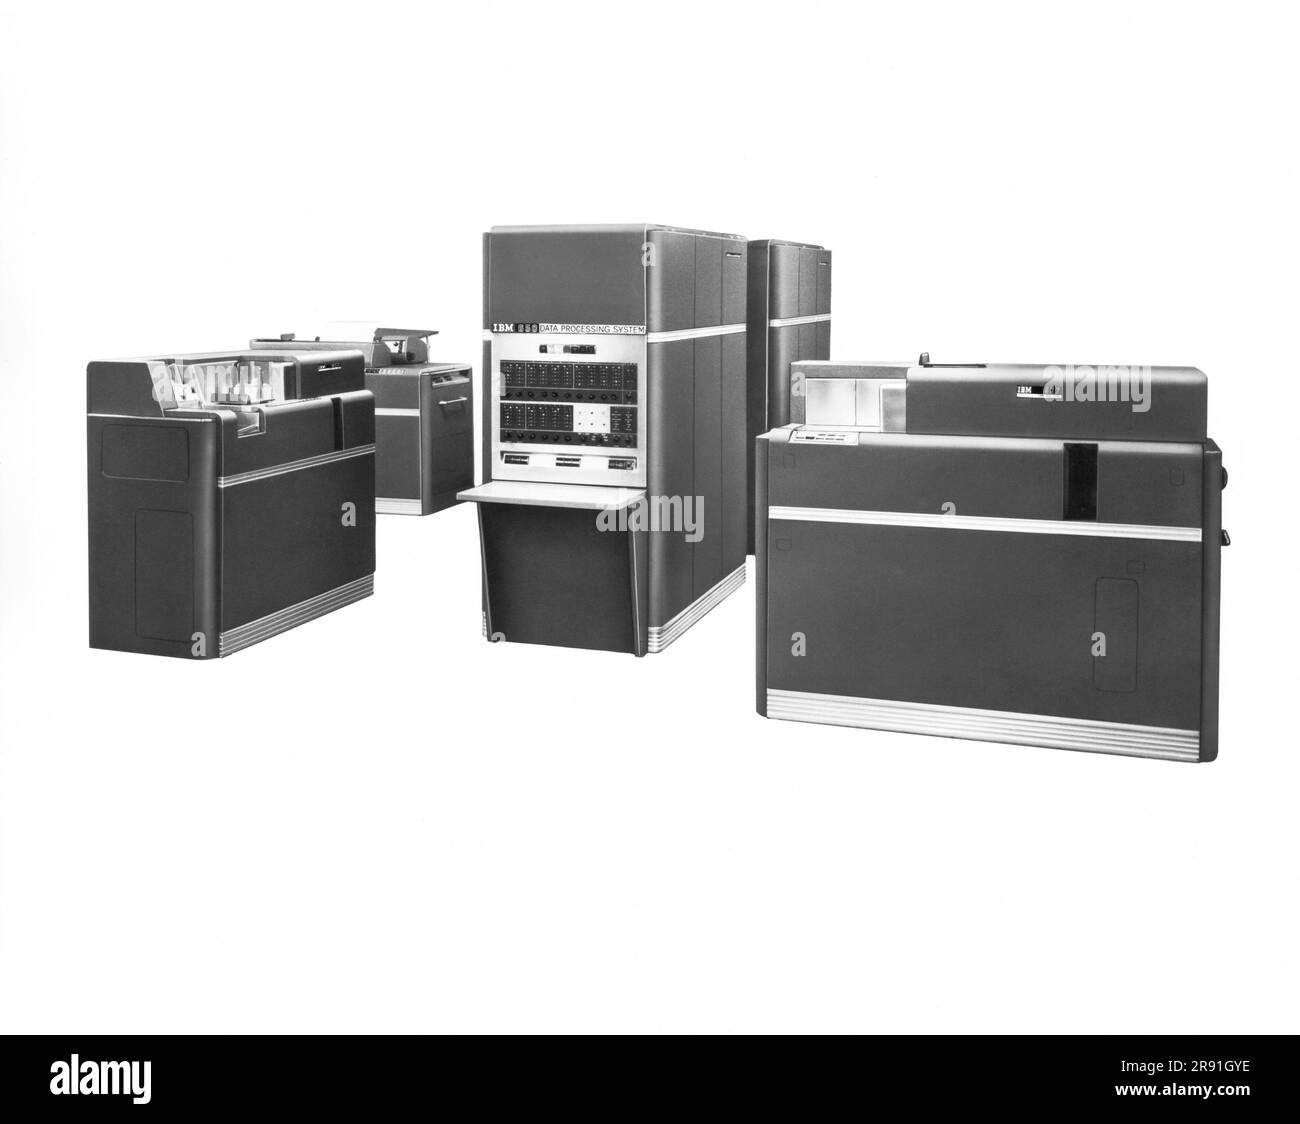 New York: 1954. IBM introduces the IBM 650 Data Processing System, which was the first mass produced computer, selling 450 of them in the first year. Stock Photo